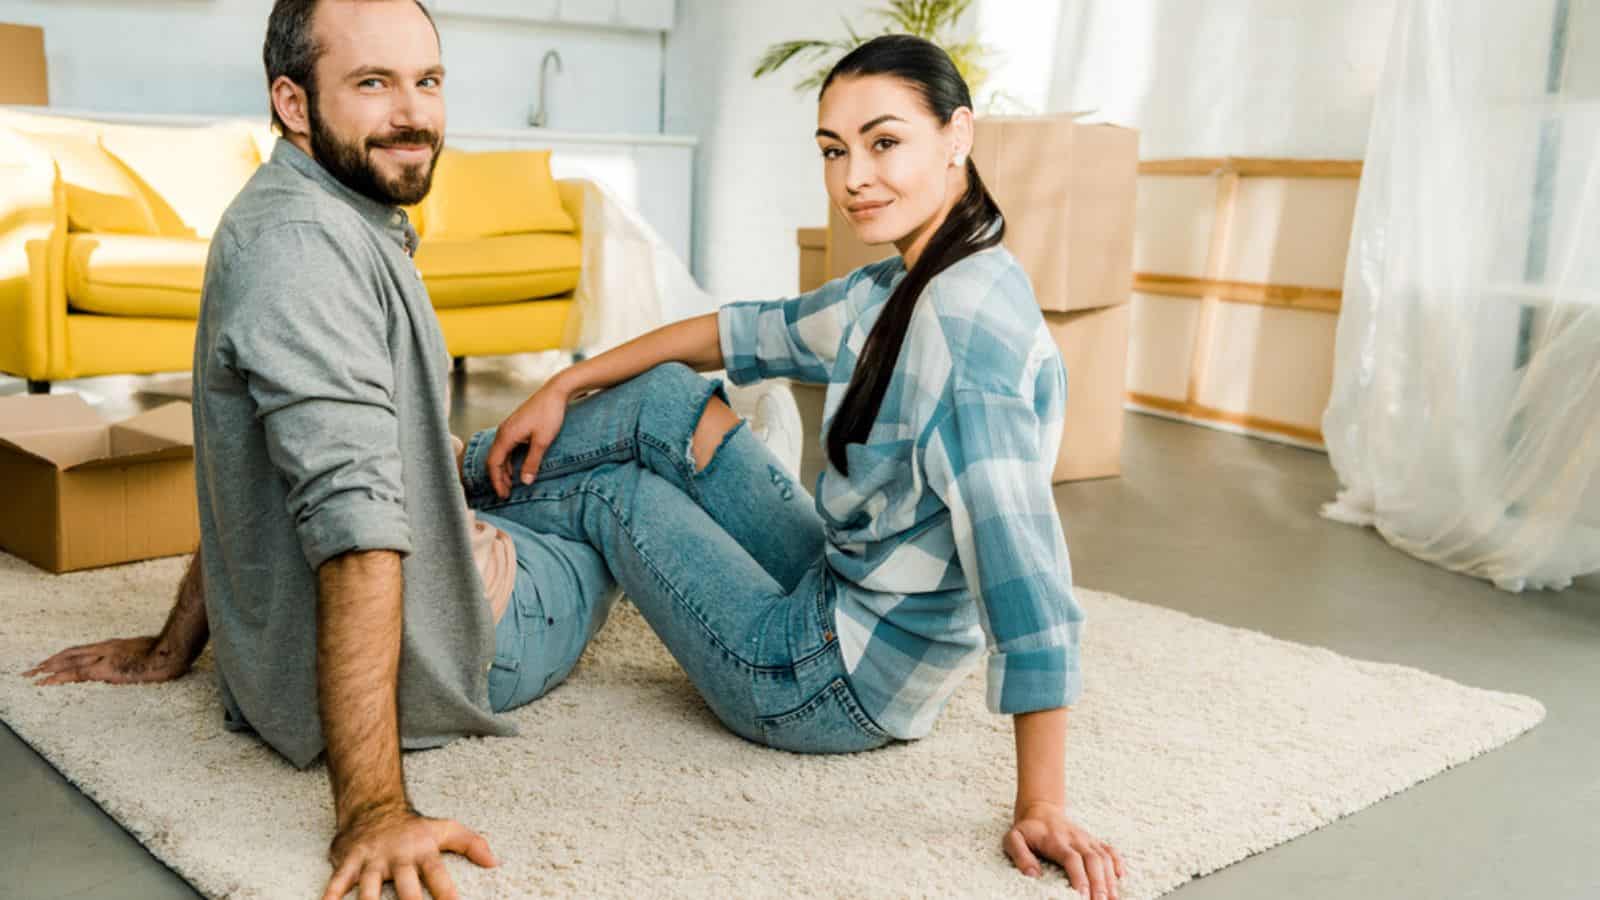 Smiling husband and wife sitting on floor